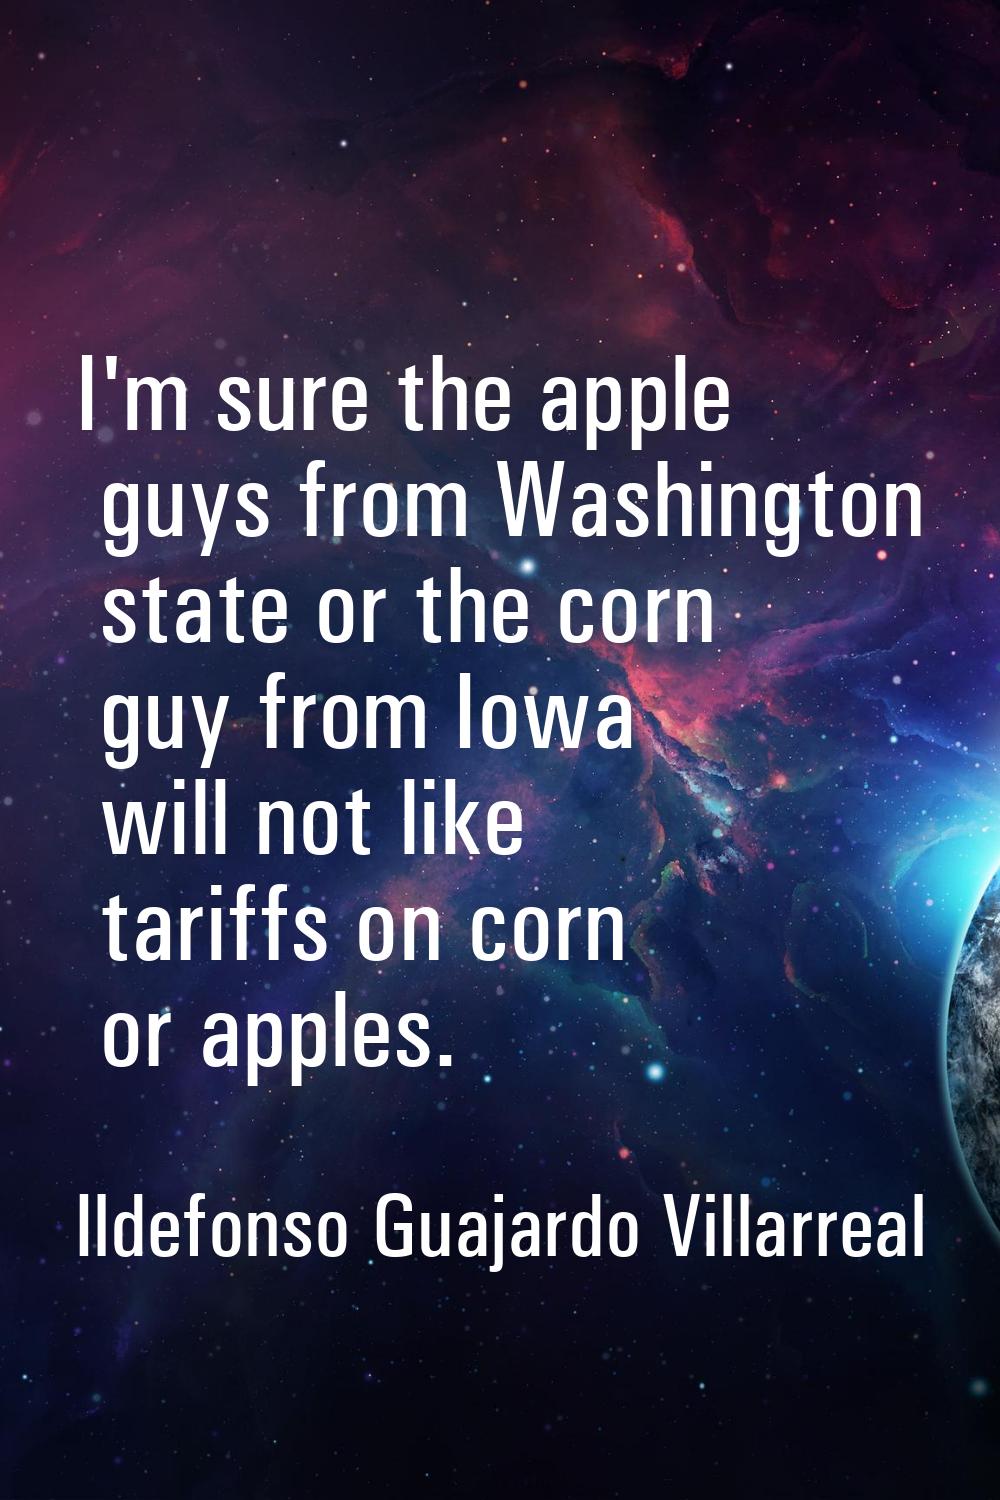 I'm sure the apple guys from Washington state or the corn guy from Iowa will not like tariffs on co